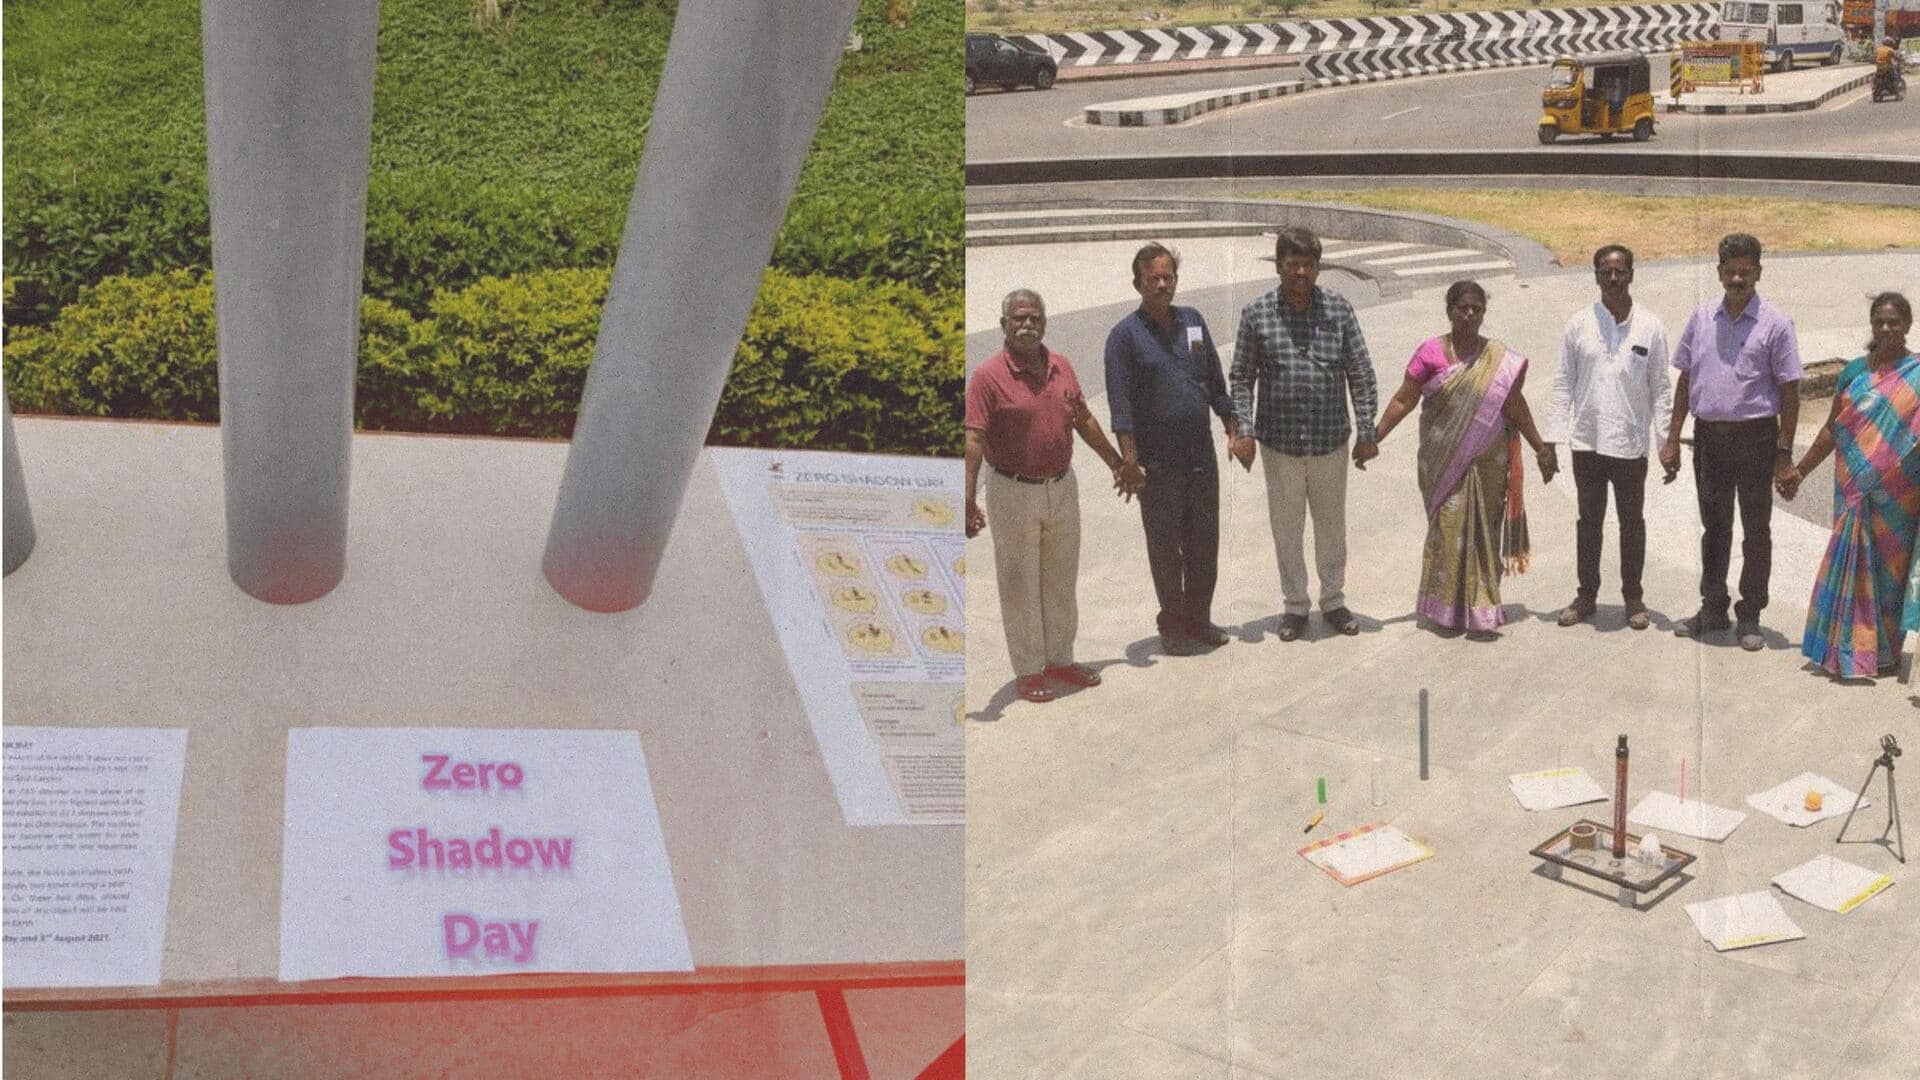 Zero Shadow Day in Bengaluru today: Here's what it means